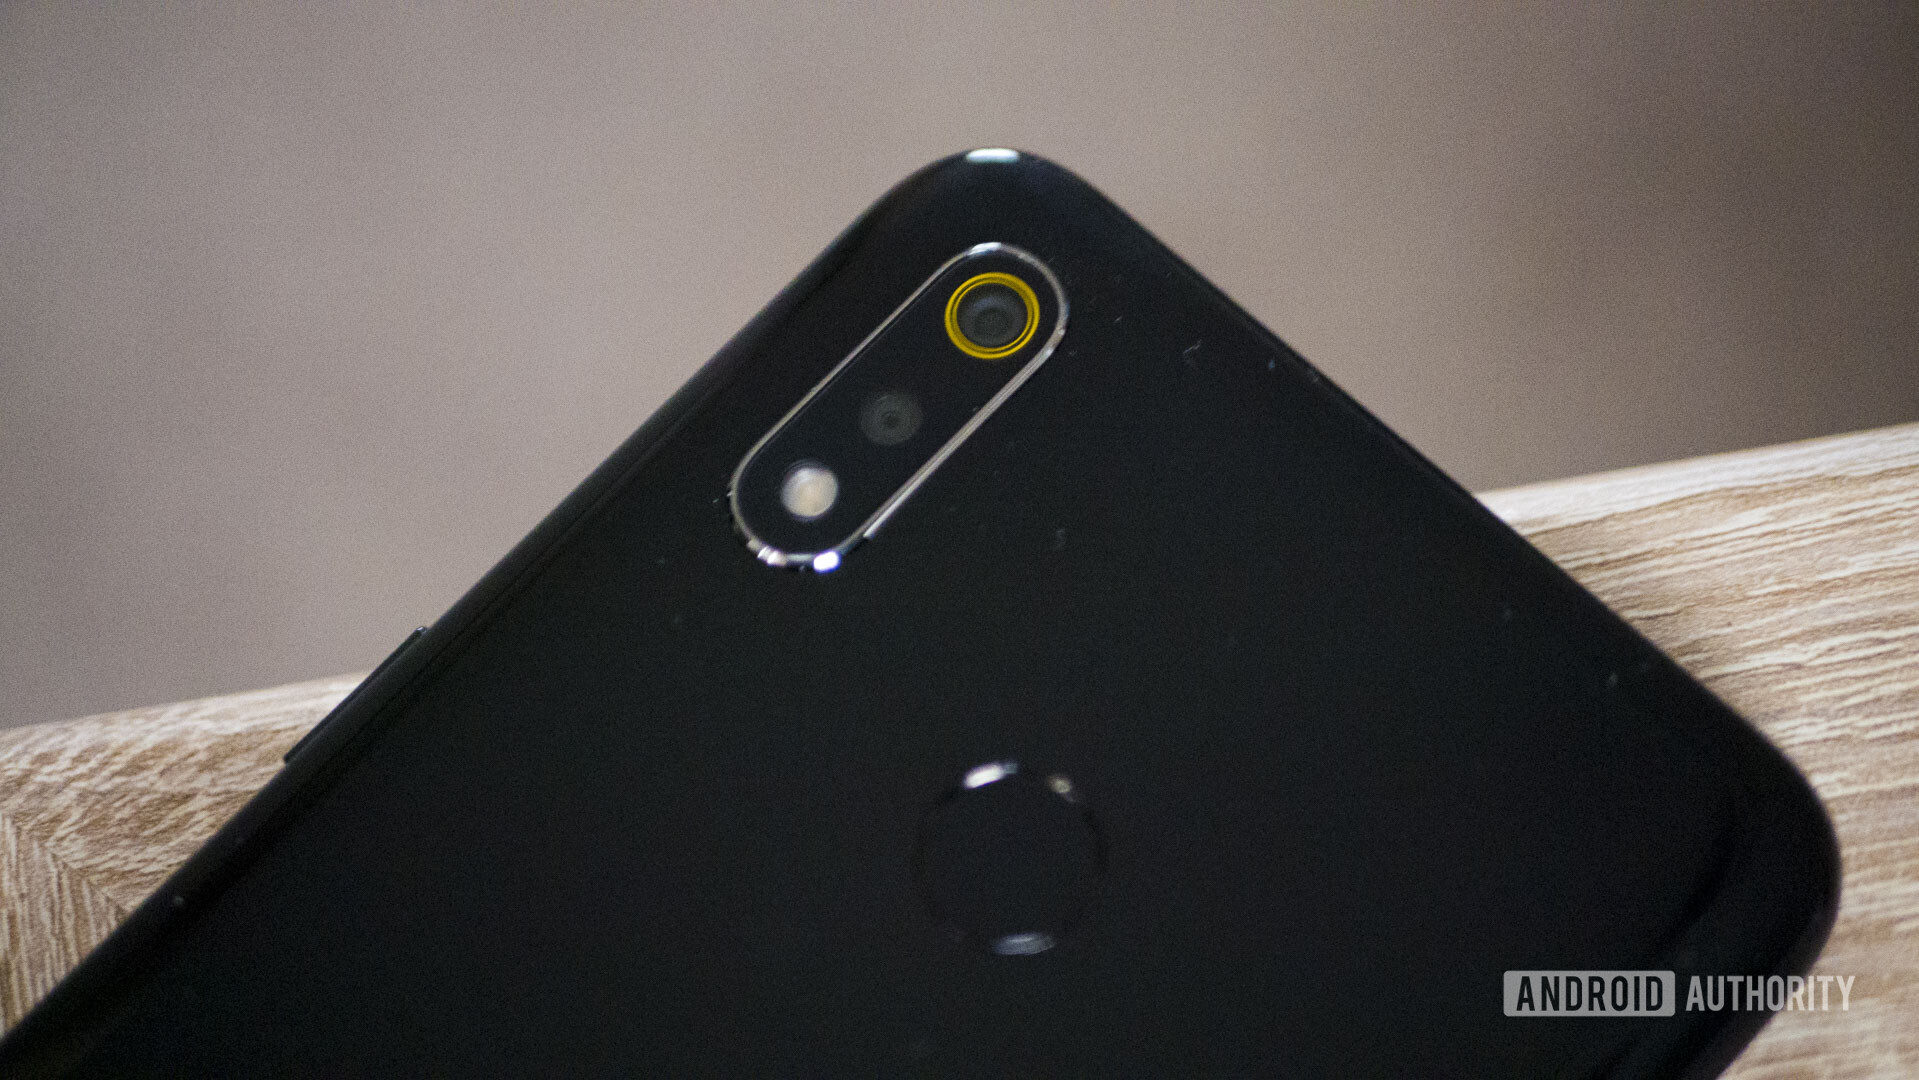 Back side of the The Realme 3 focusing on the cameras that feature Night mode.